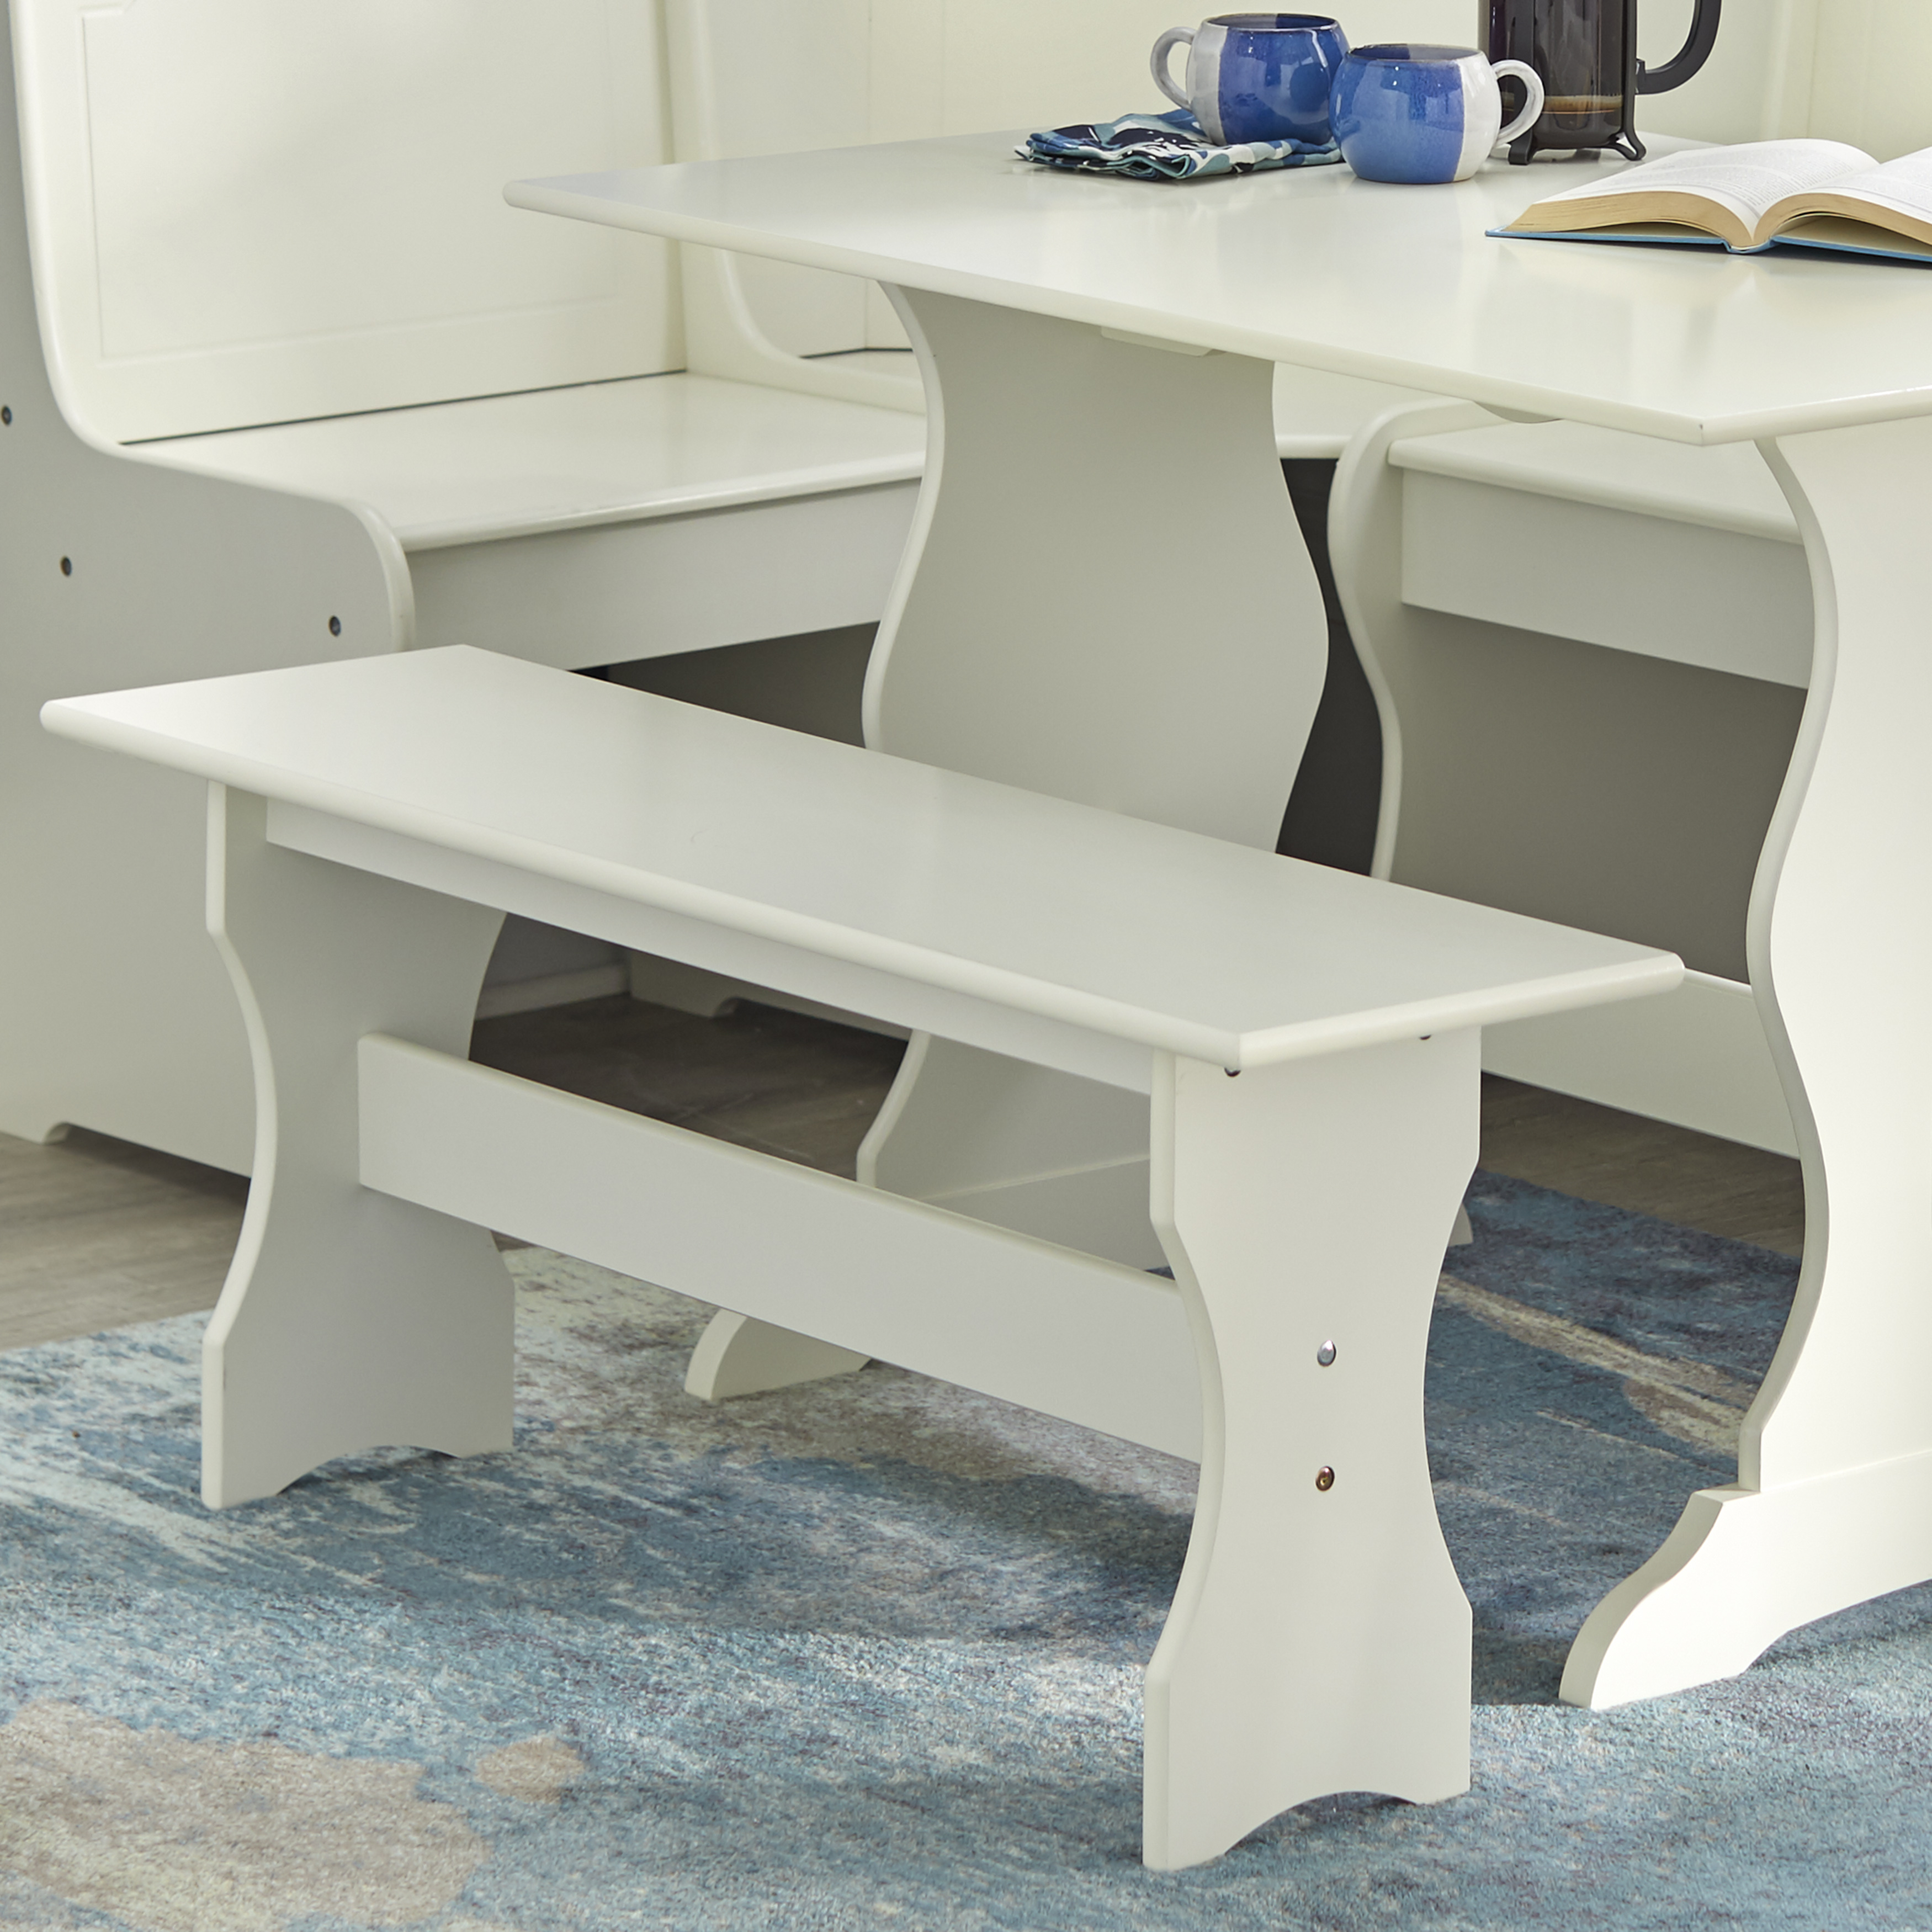 TMS Corner Reversible Dining Breakfast Nook with Storage, White - image 2 of 7